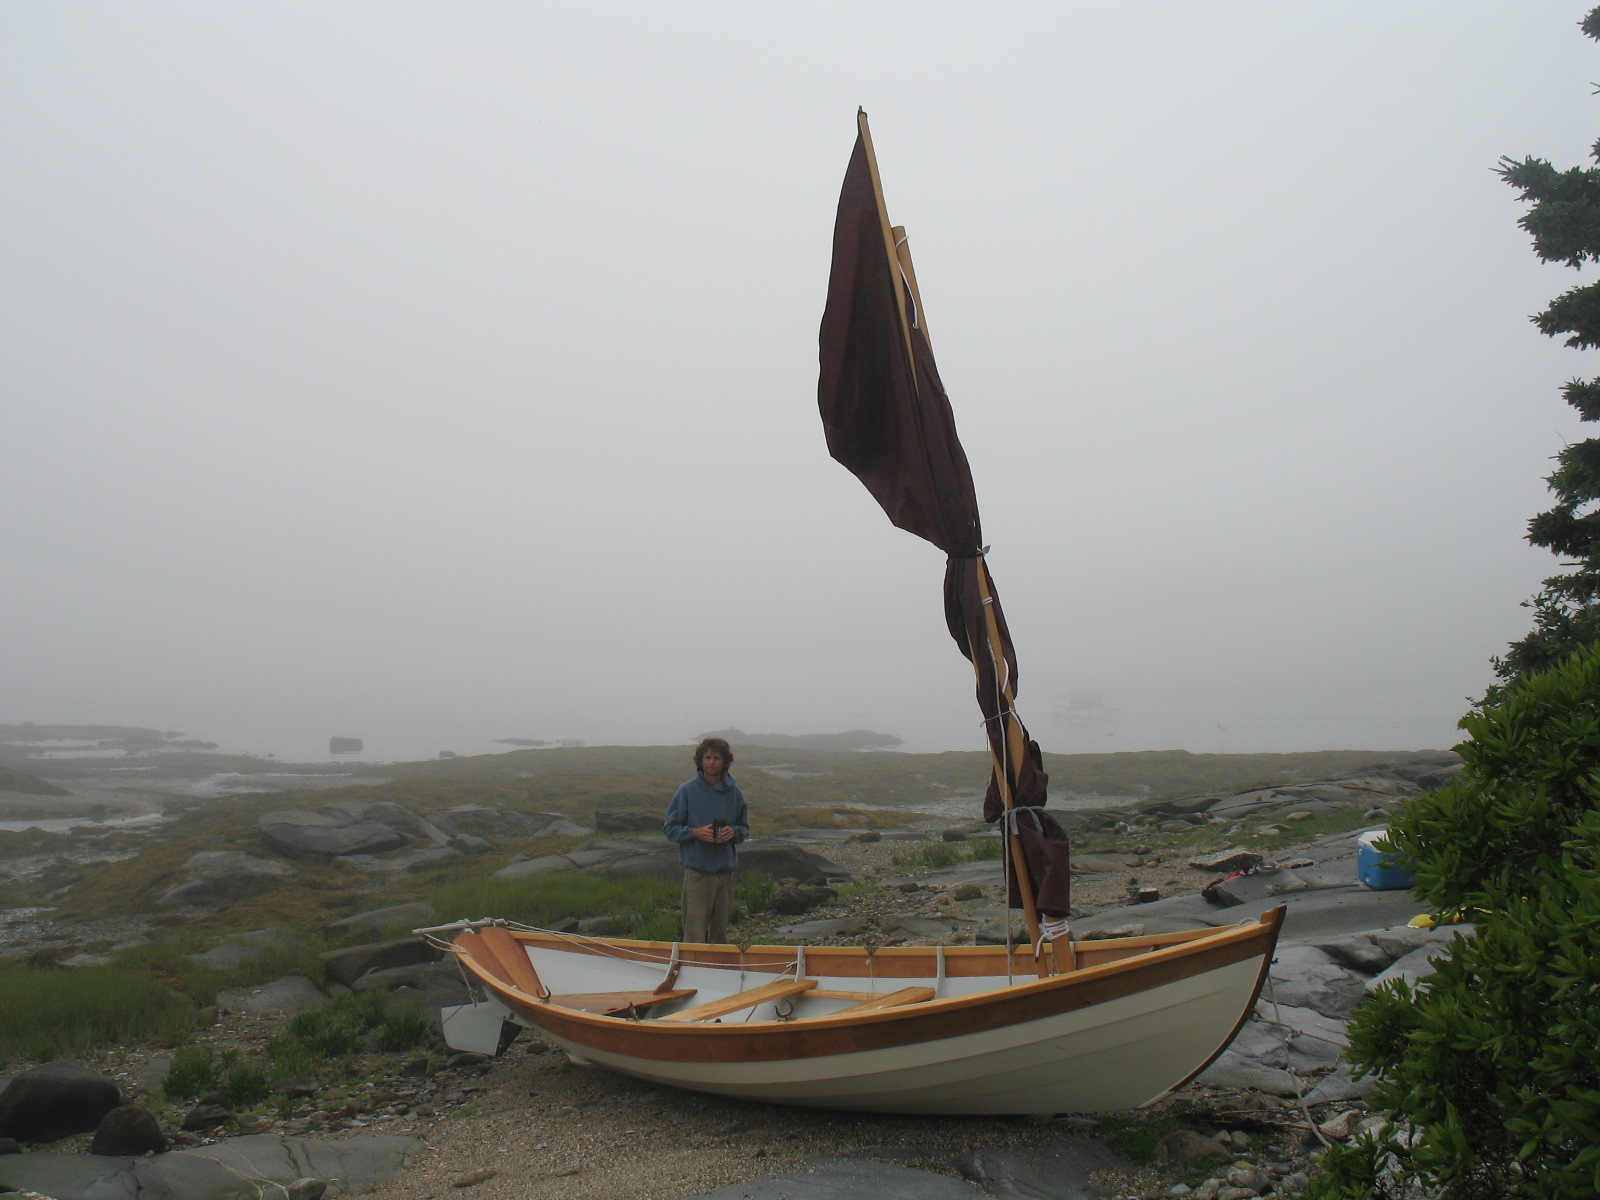 Building, Designing, and Using Small Boats on the Coast of 